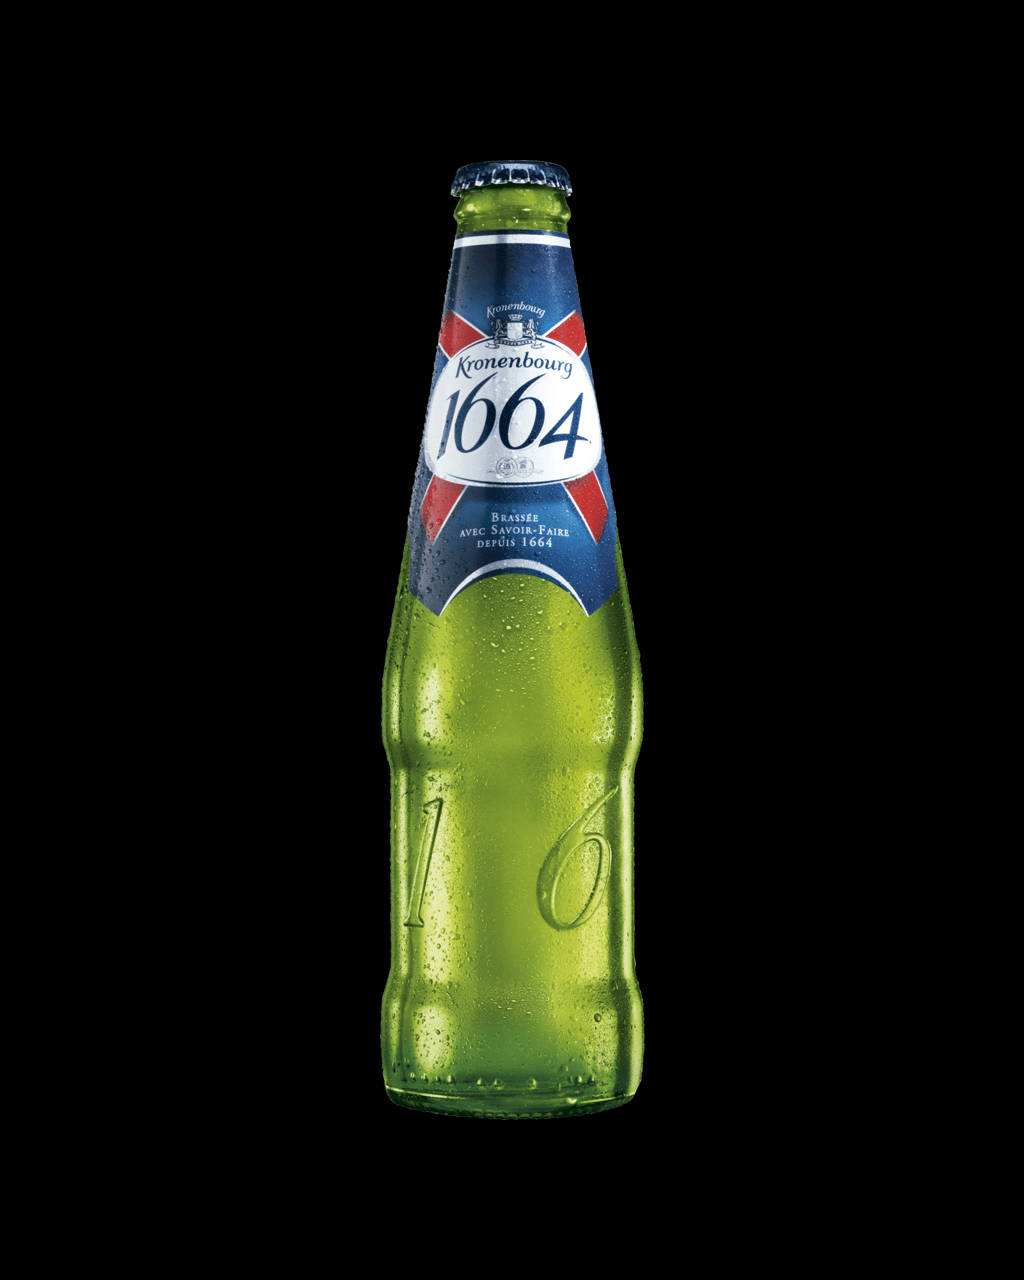 A Pint Of Excellence - Kronenbourg Lager Wallpaper